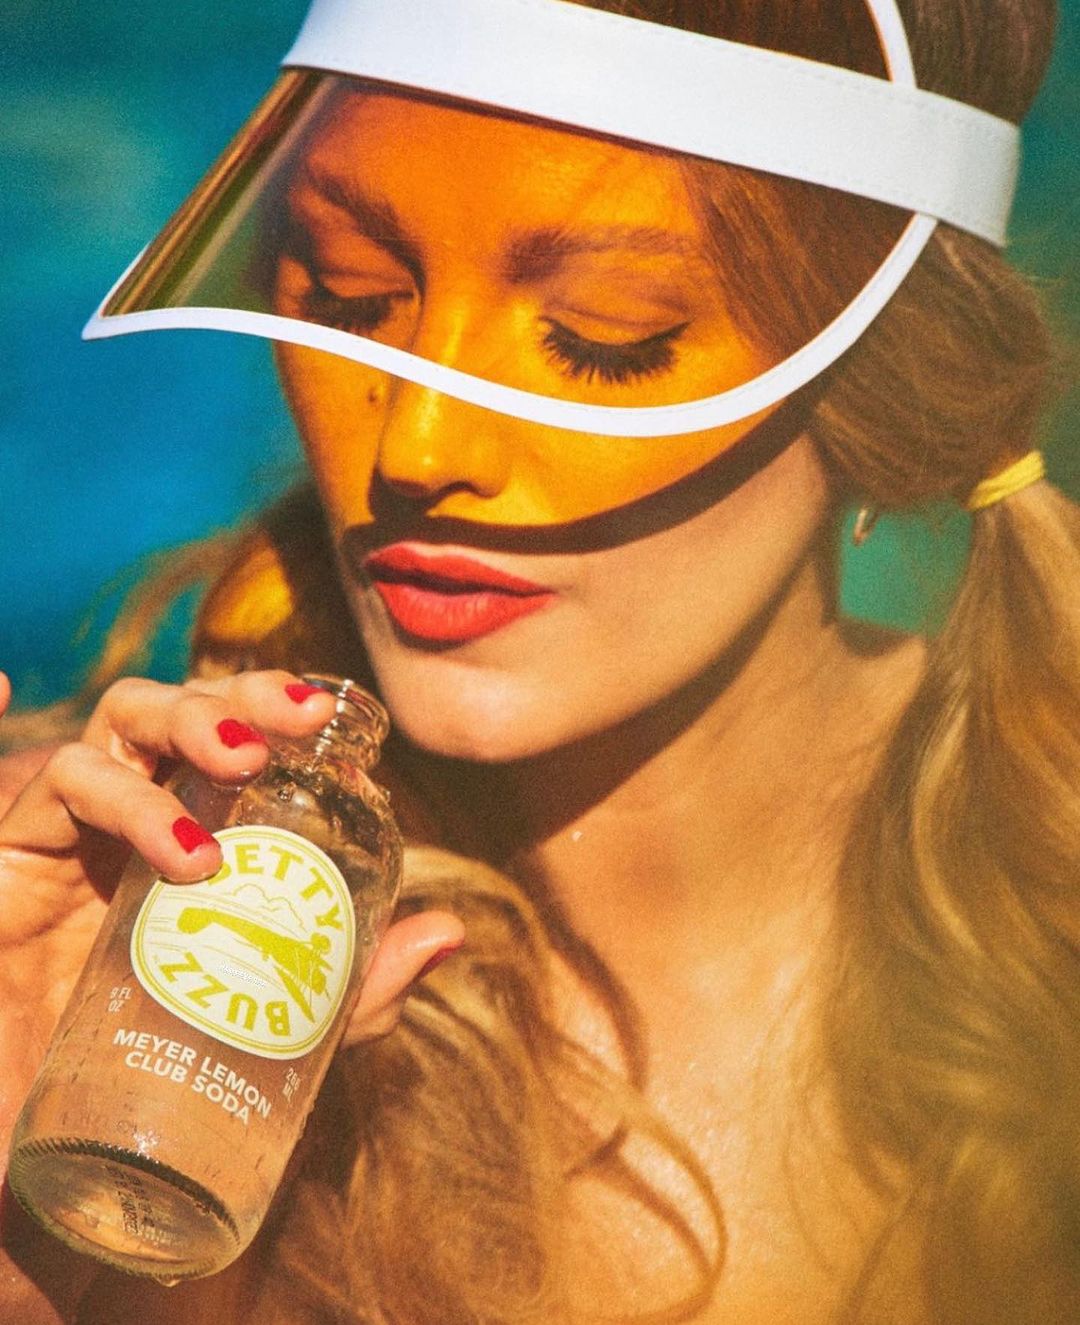 Blake Lively Gets Steamy By the Pool in Her Latest Betty Buzz Campaign! - Photo 4